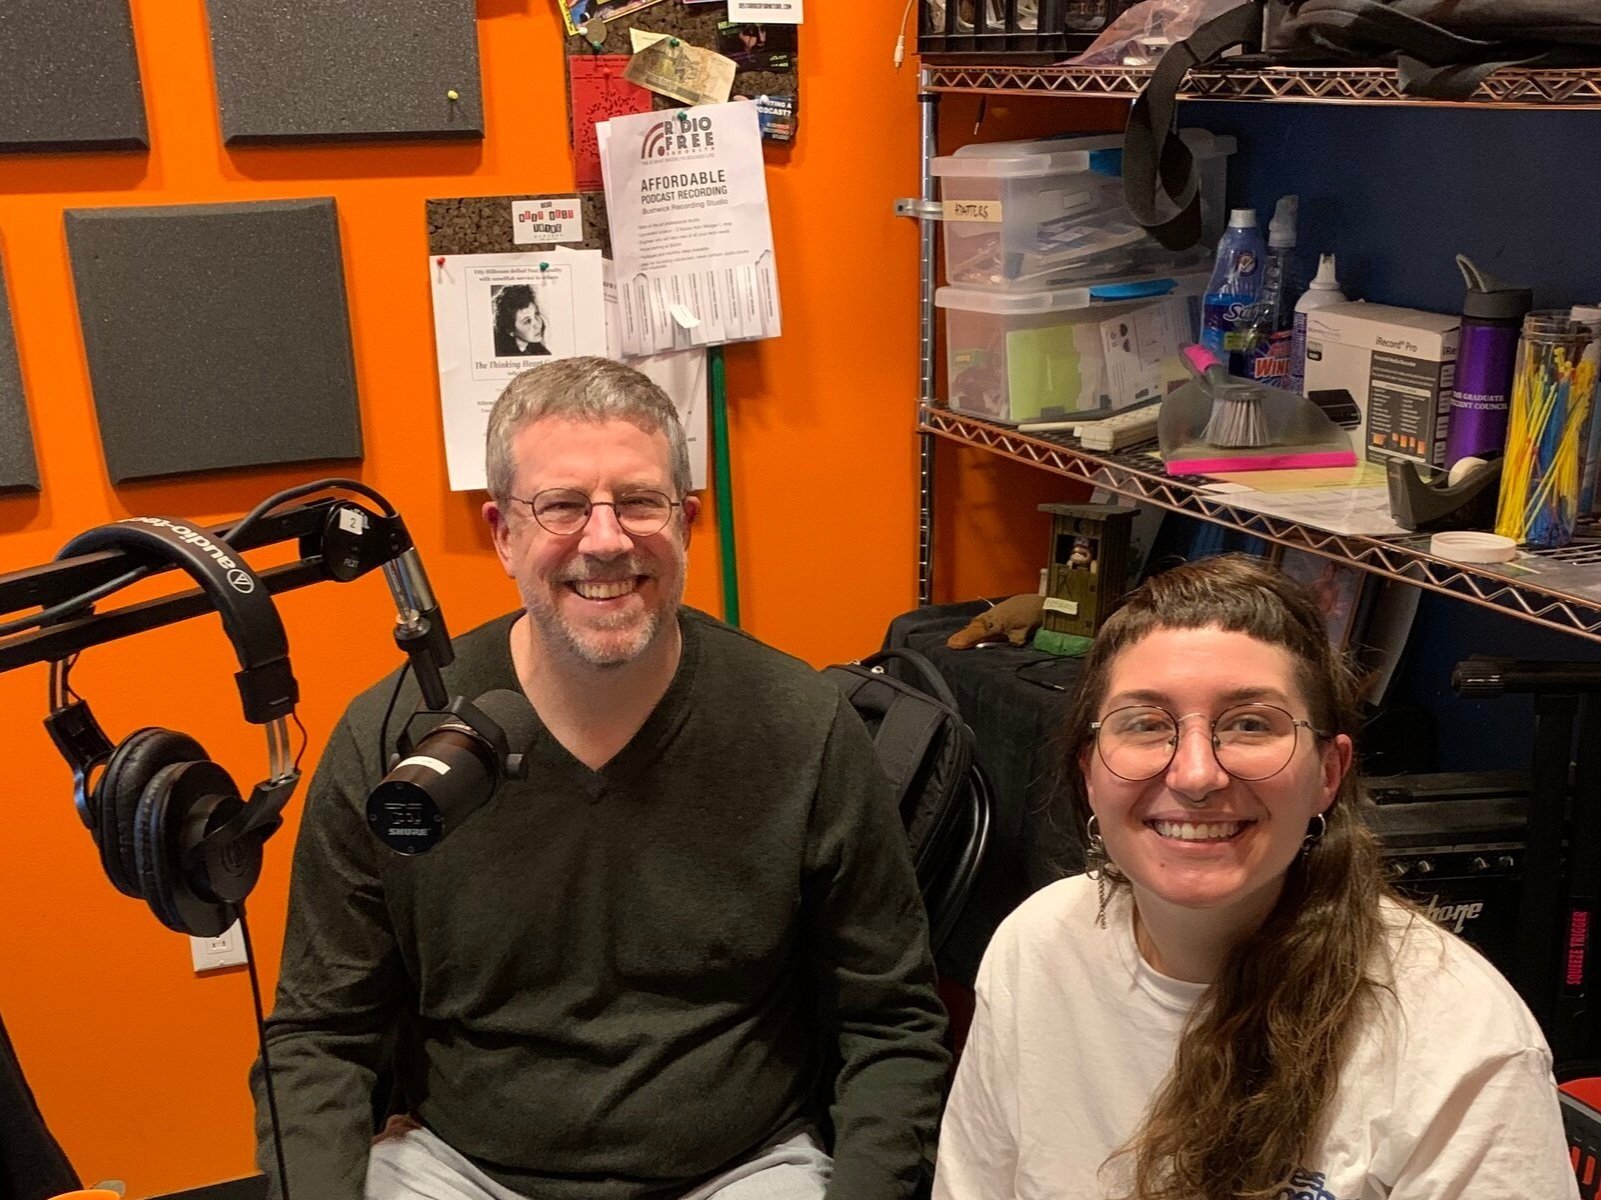 Jim and Lizzie in the podcast studio.